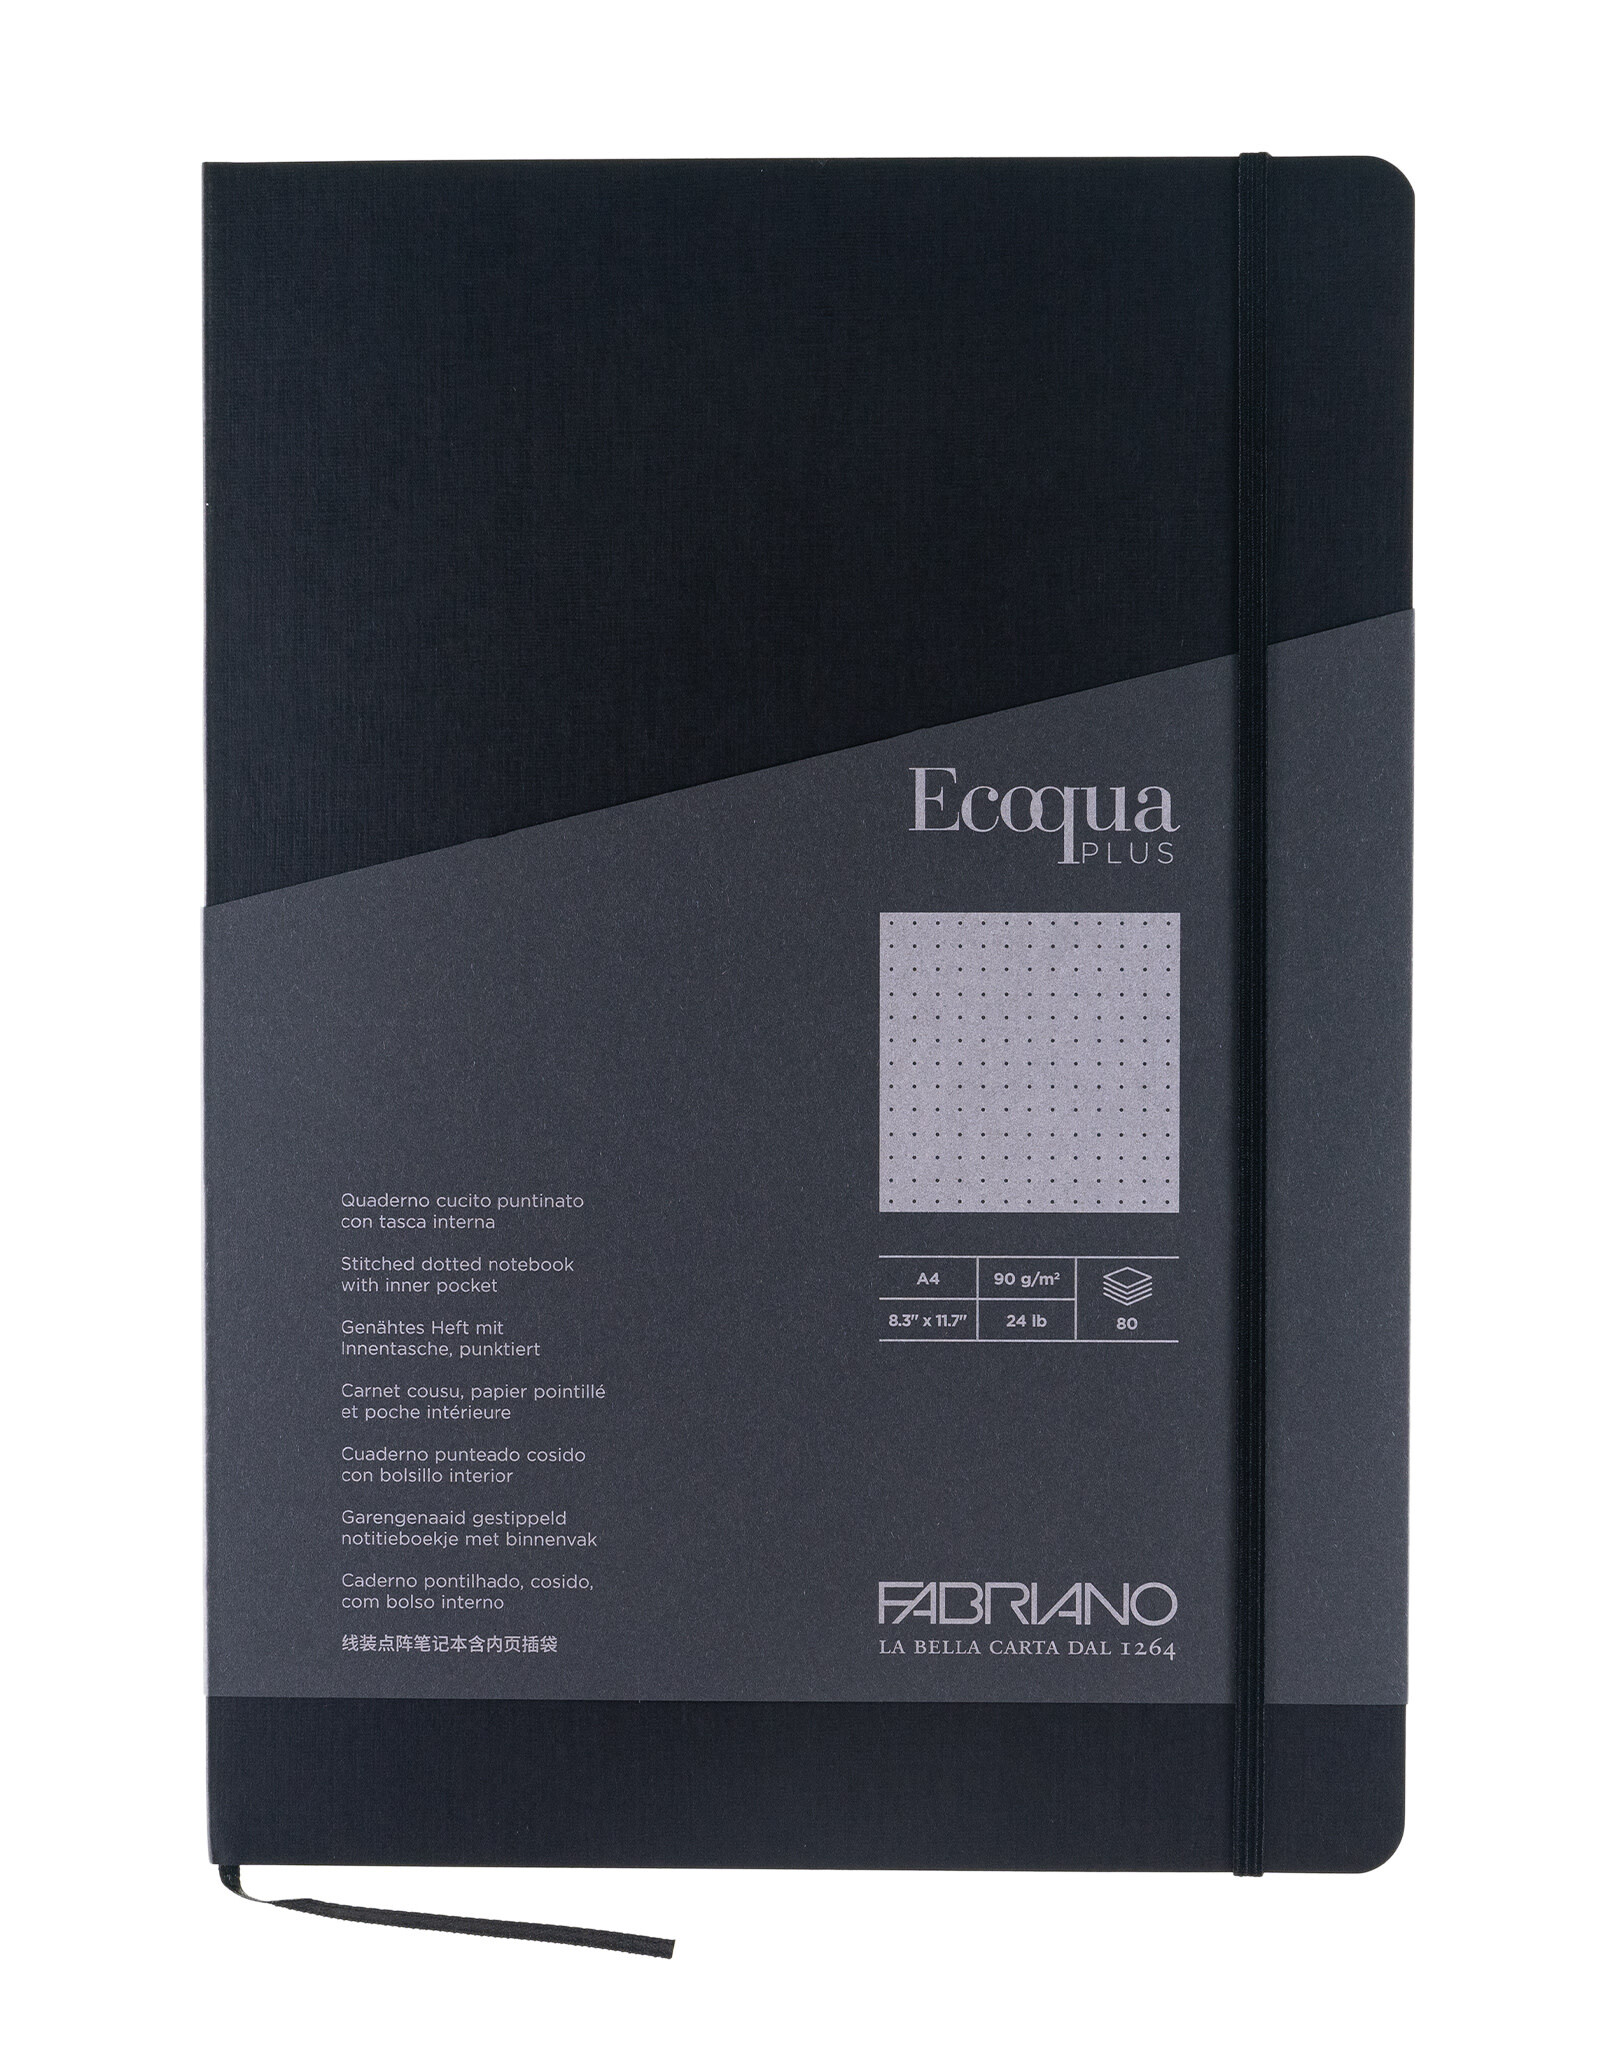 Ecoqua Plus Sewn Spine Notebook, Black, A4, Dotted